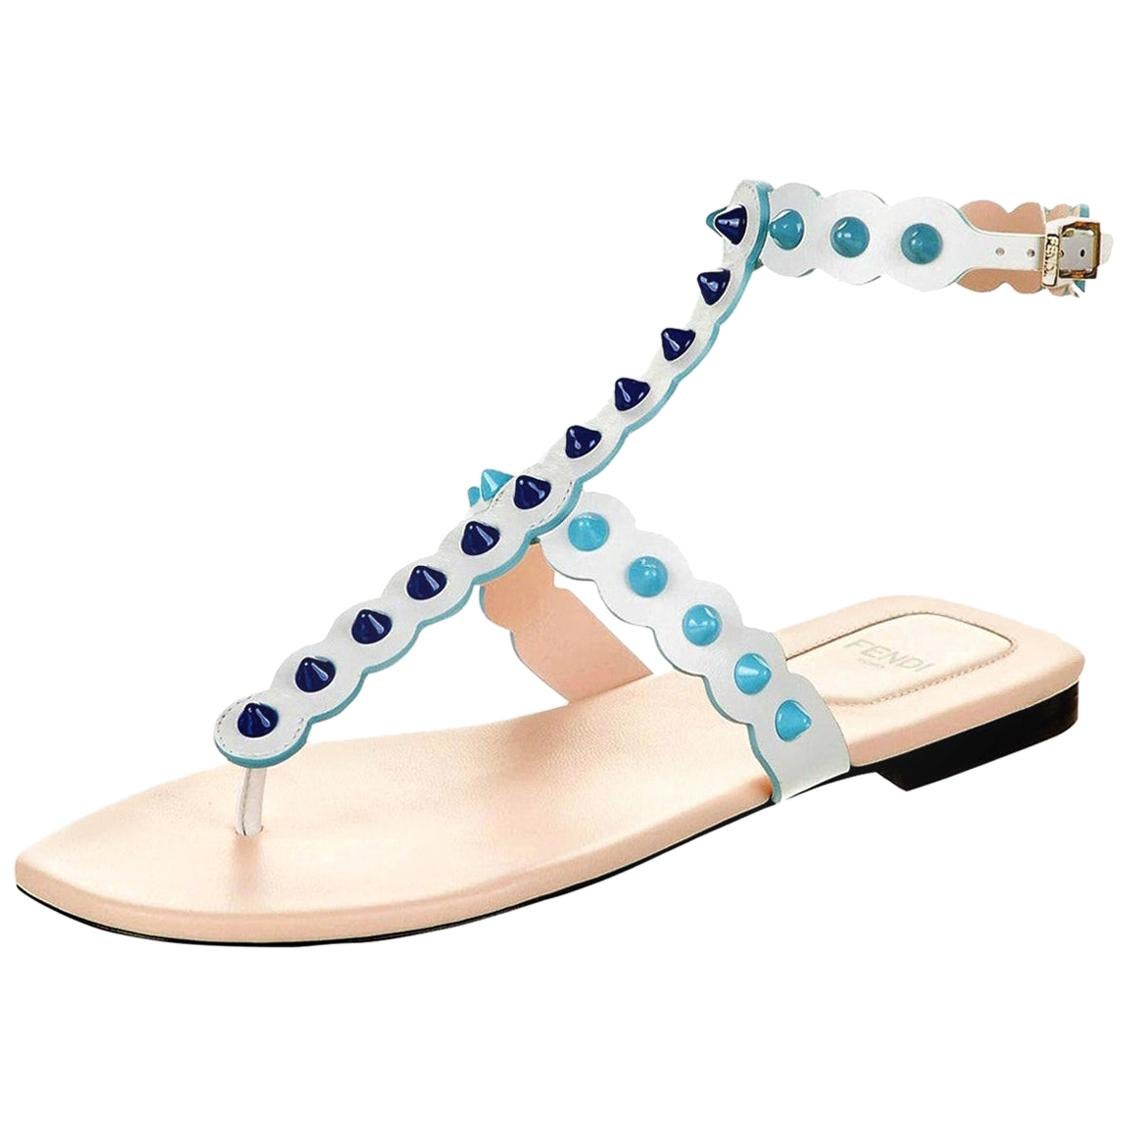 Brand New
Stunning Monster Sandals
S/S 2017 Runway & Ad
Size: 39
White & Blue Leather
Heel 0.25